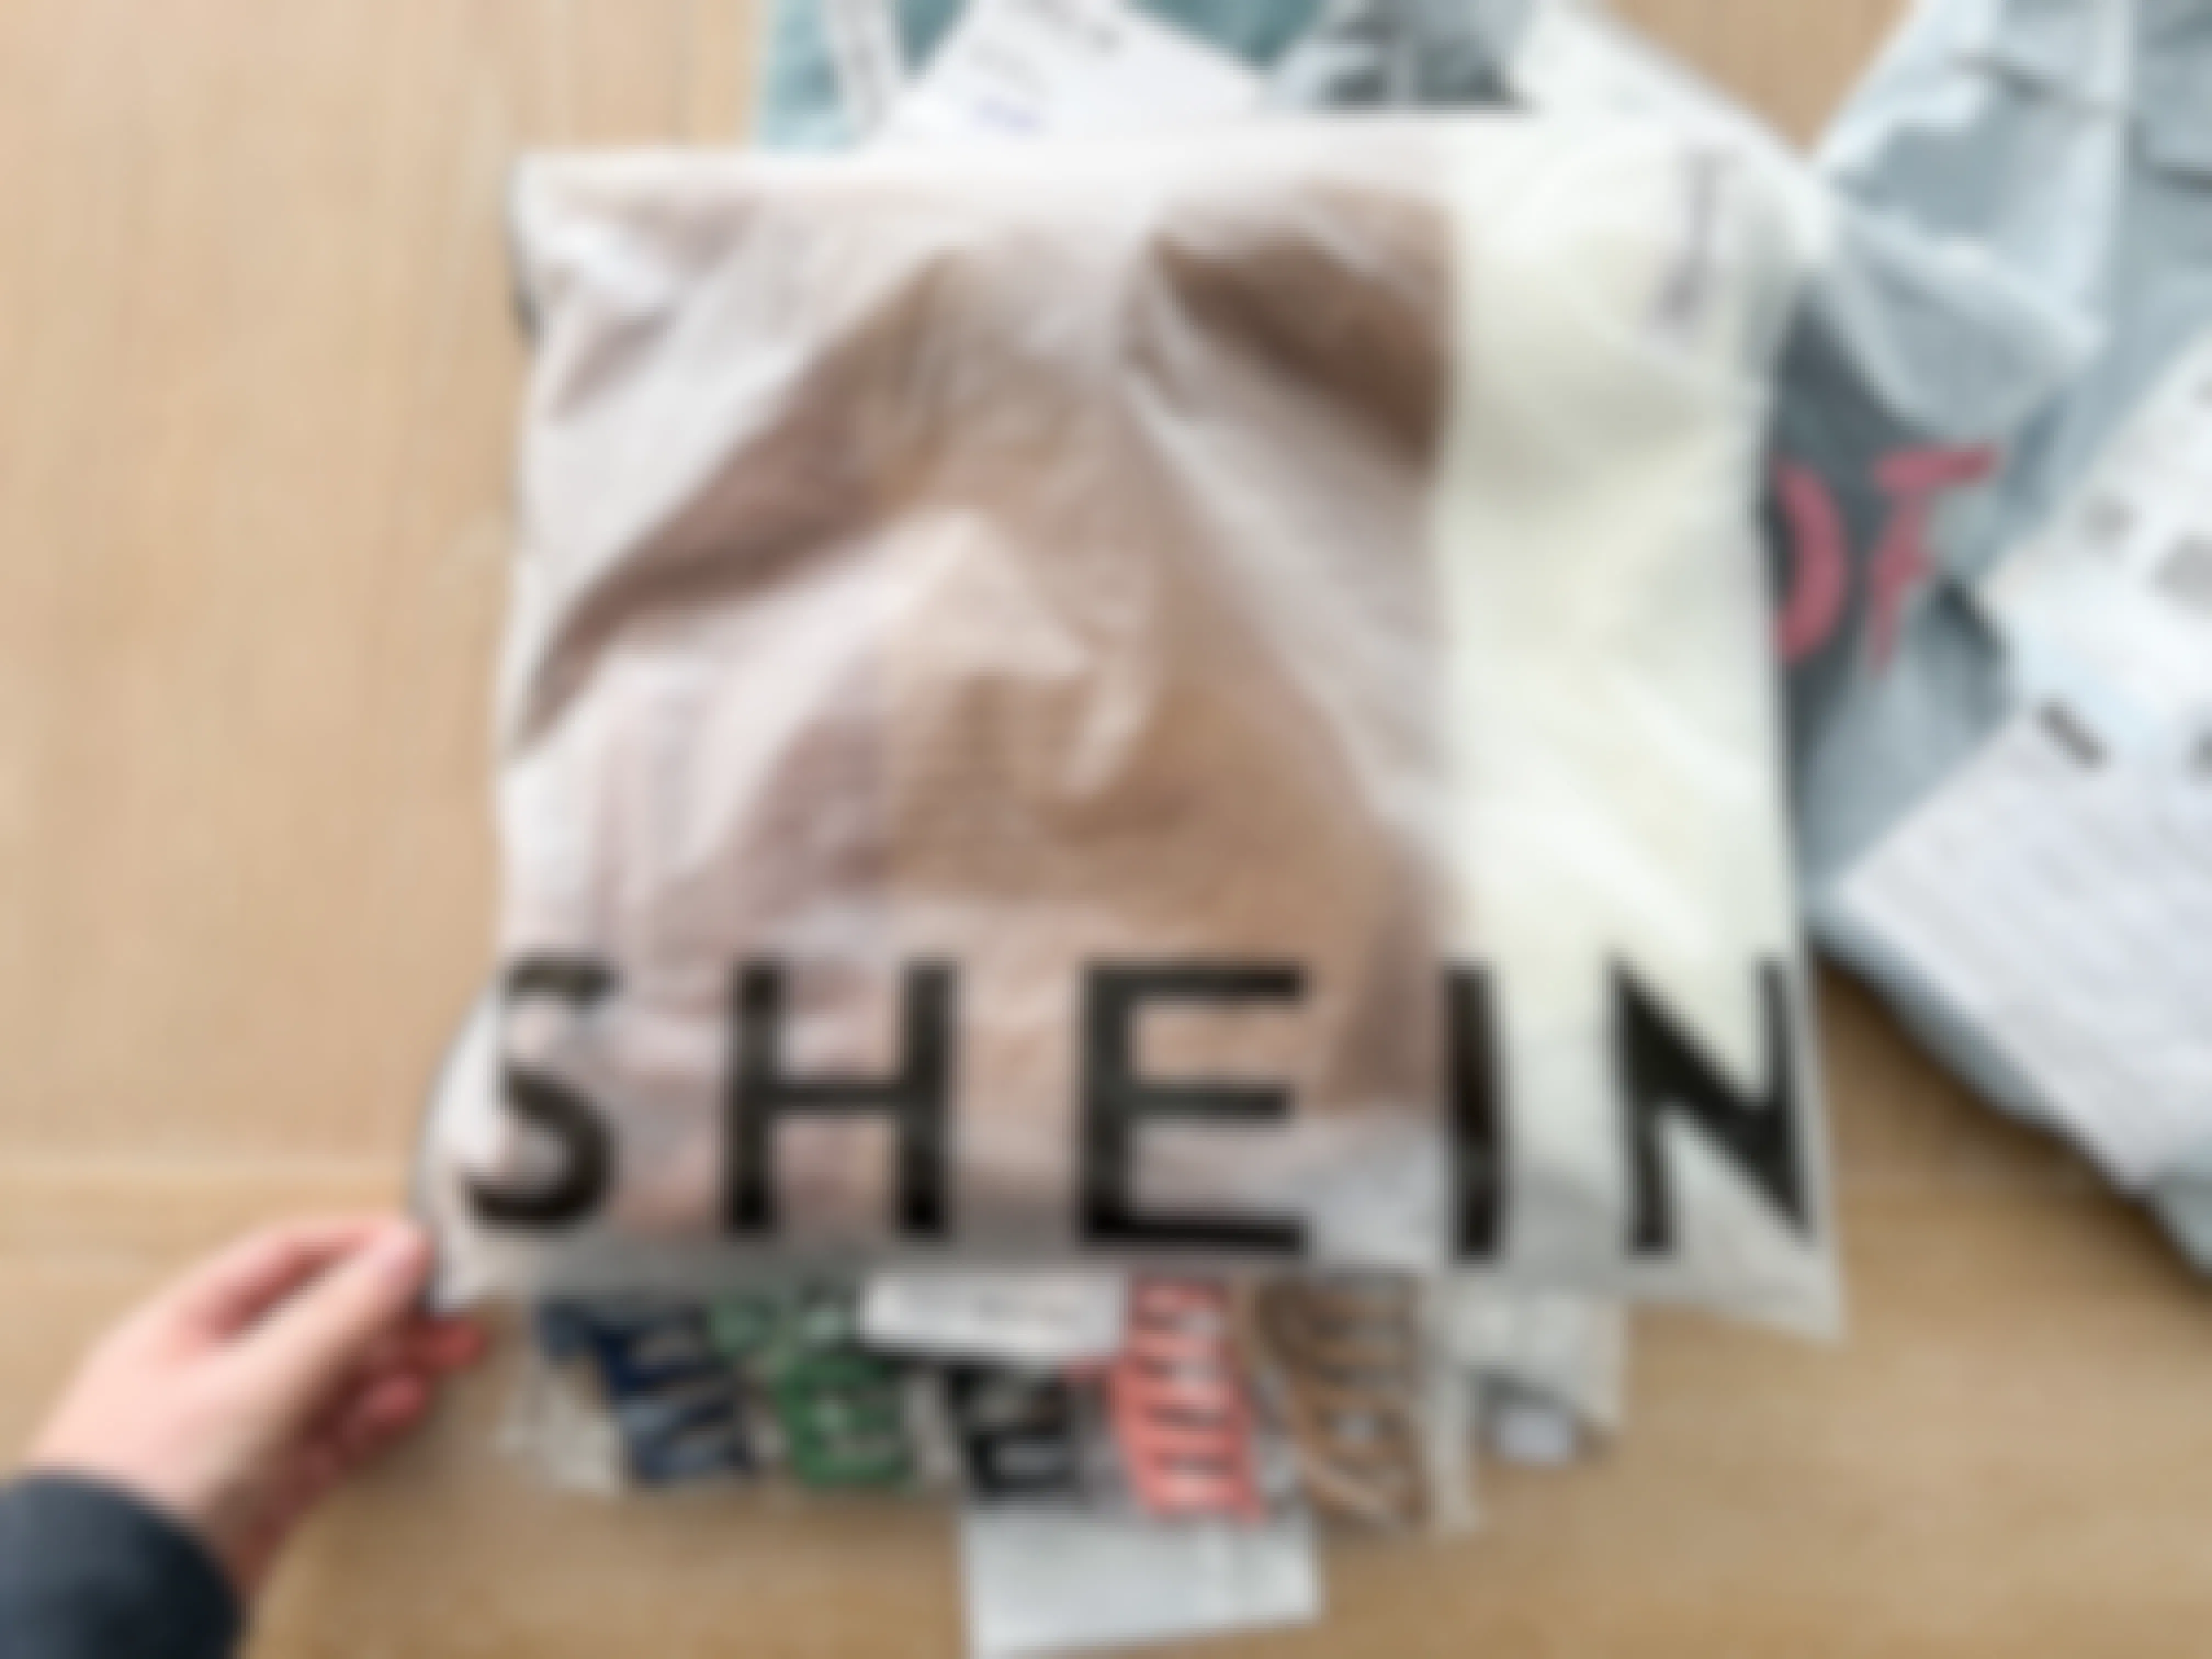 A person's hand grabbing a package of SHEIN clothes sitting on a wooden table.